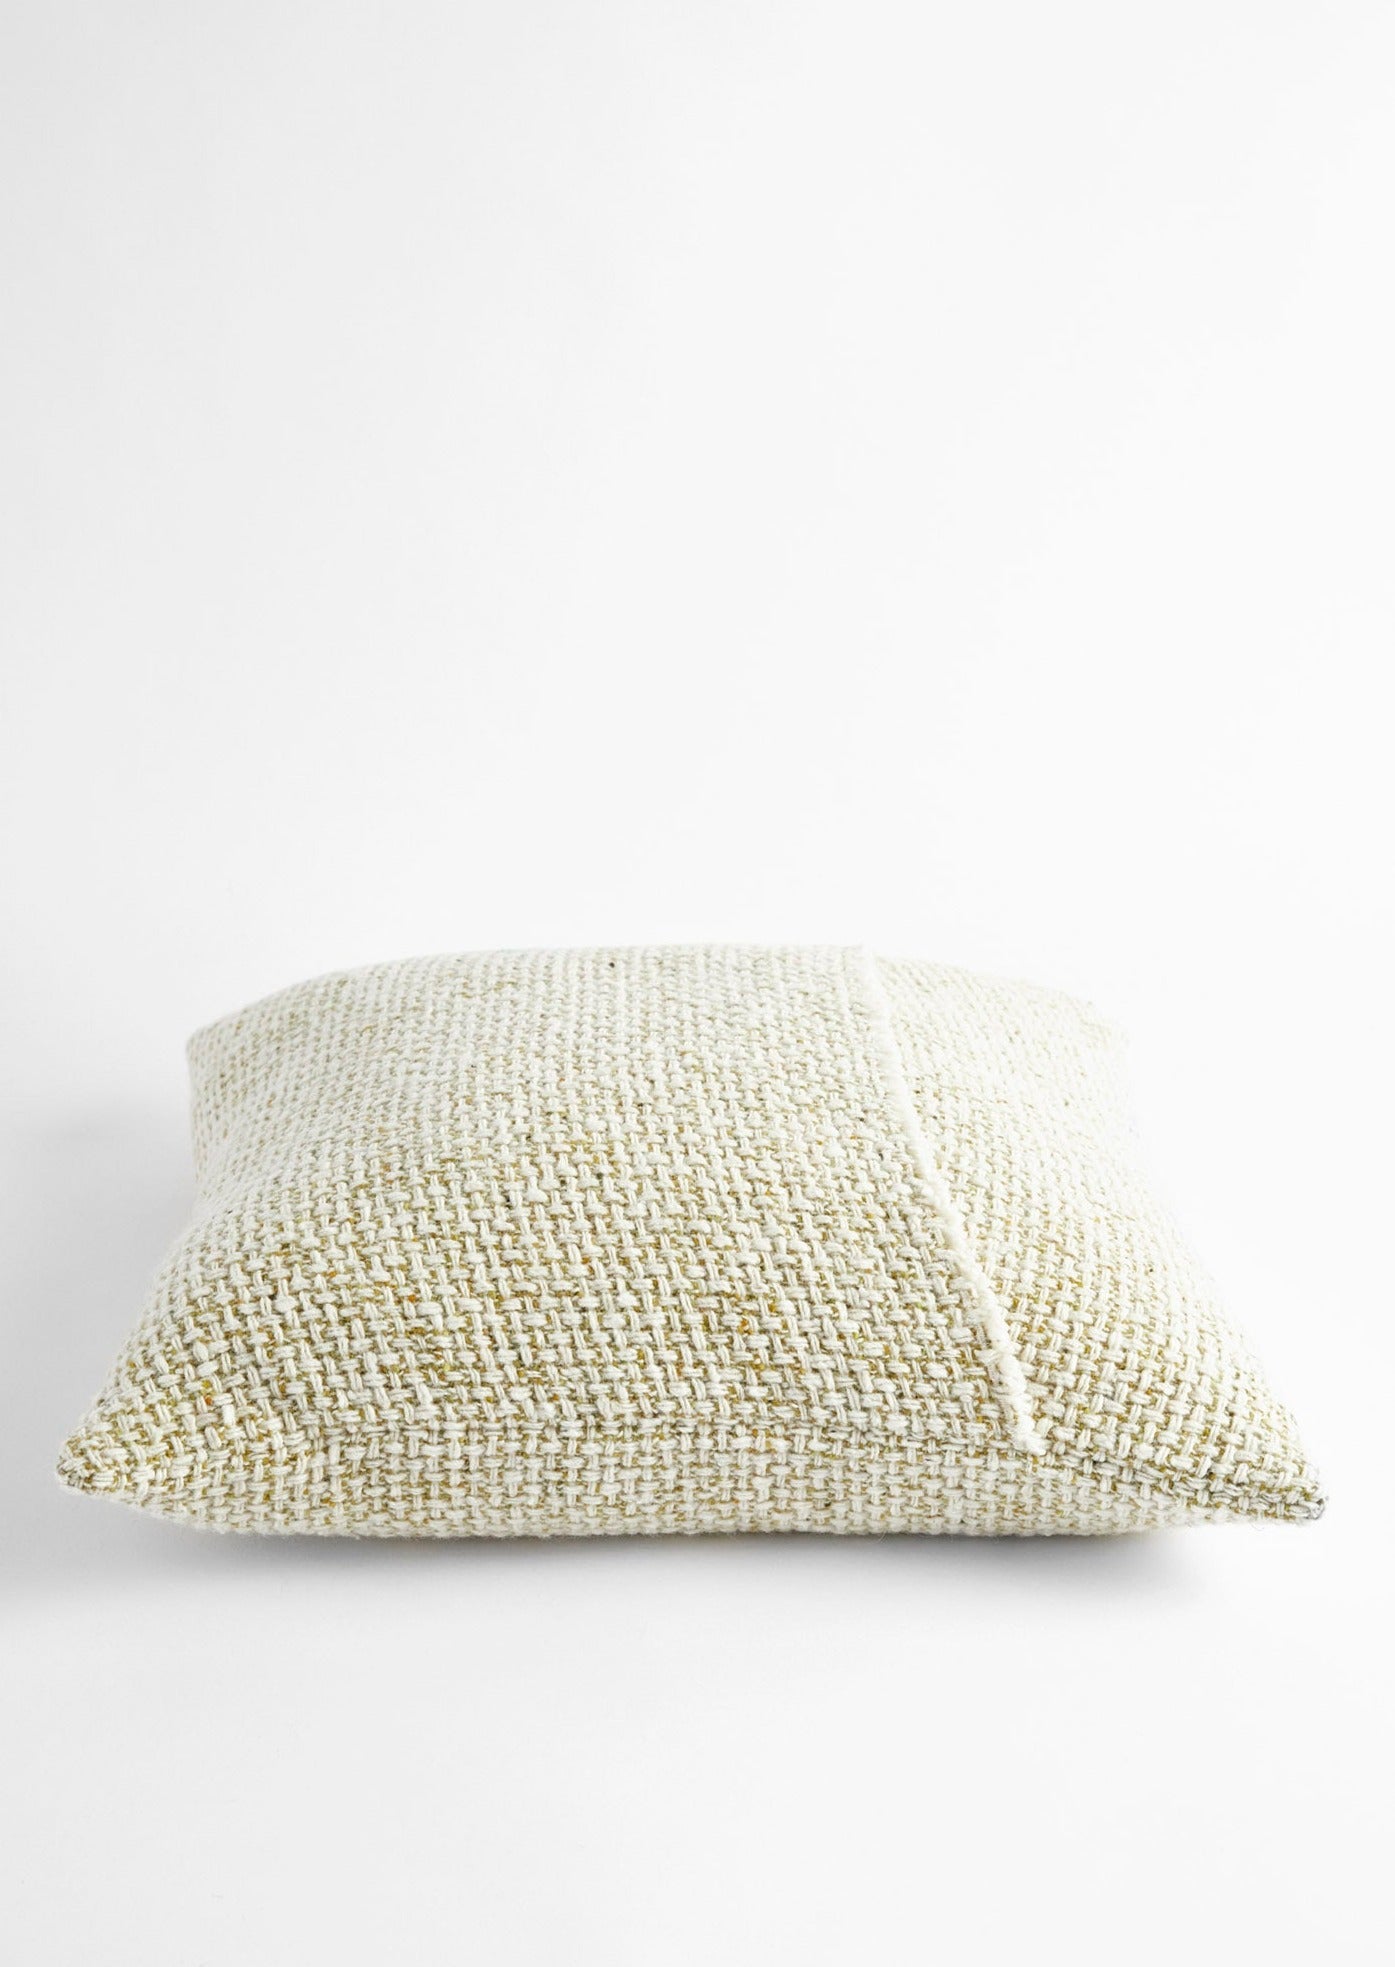 Mended Tweed Cushion - Gooseberry